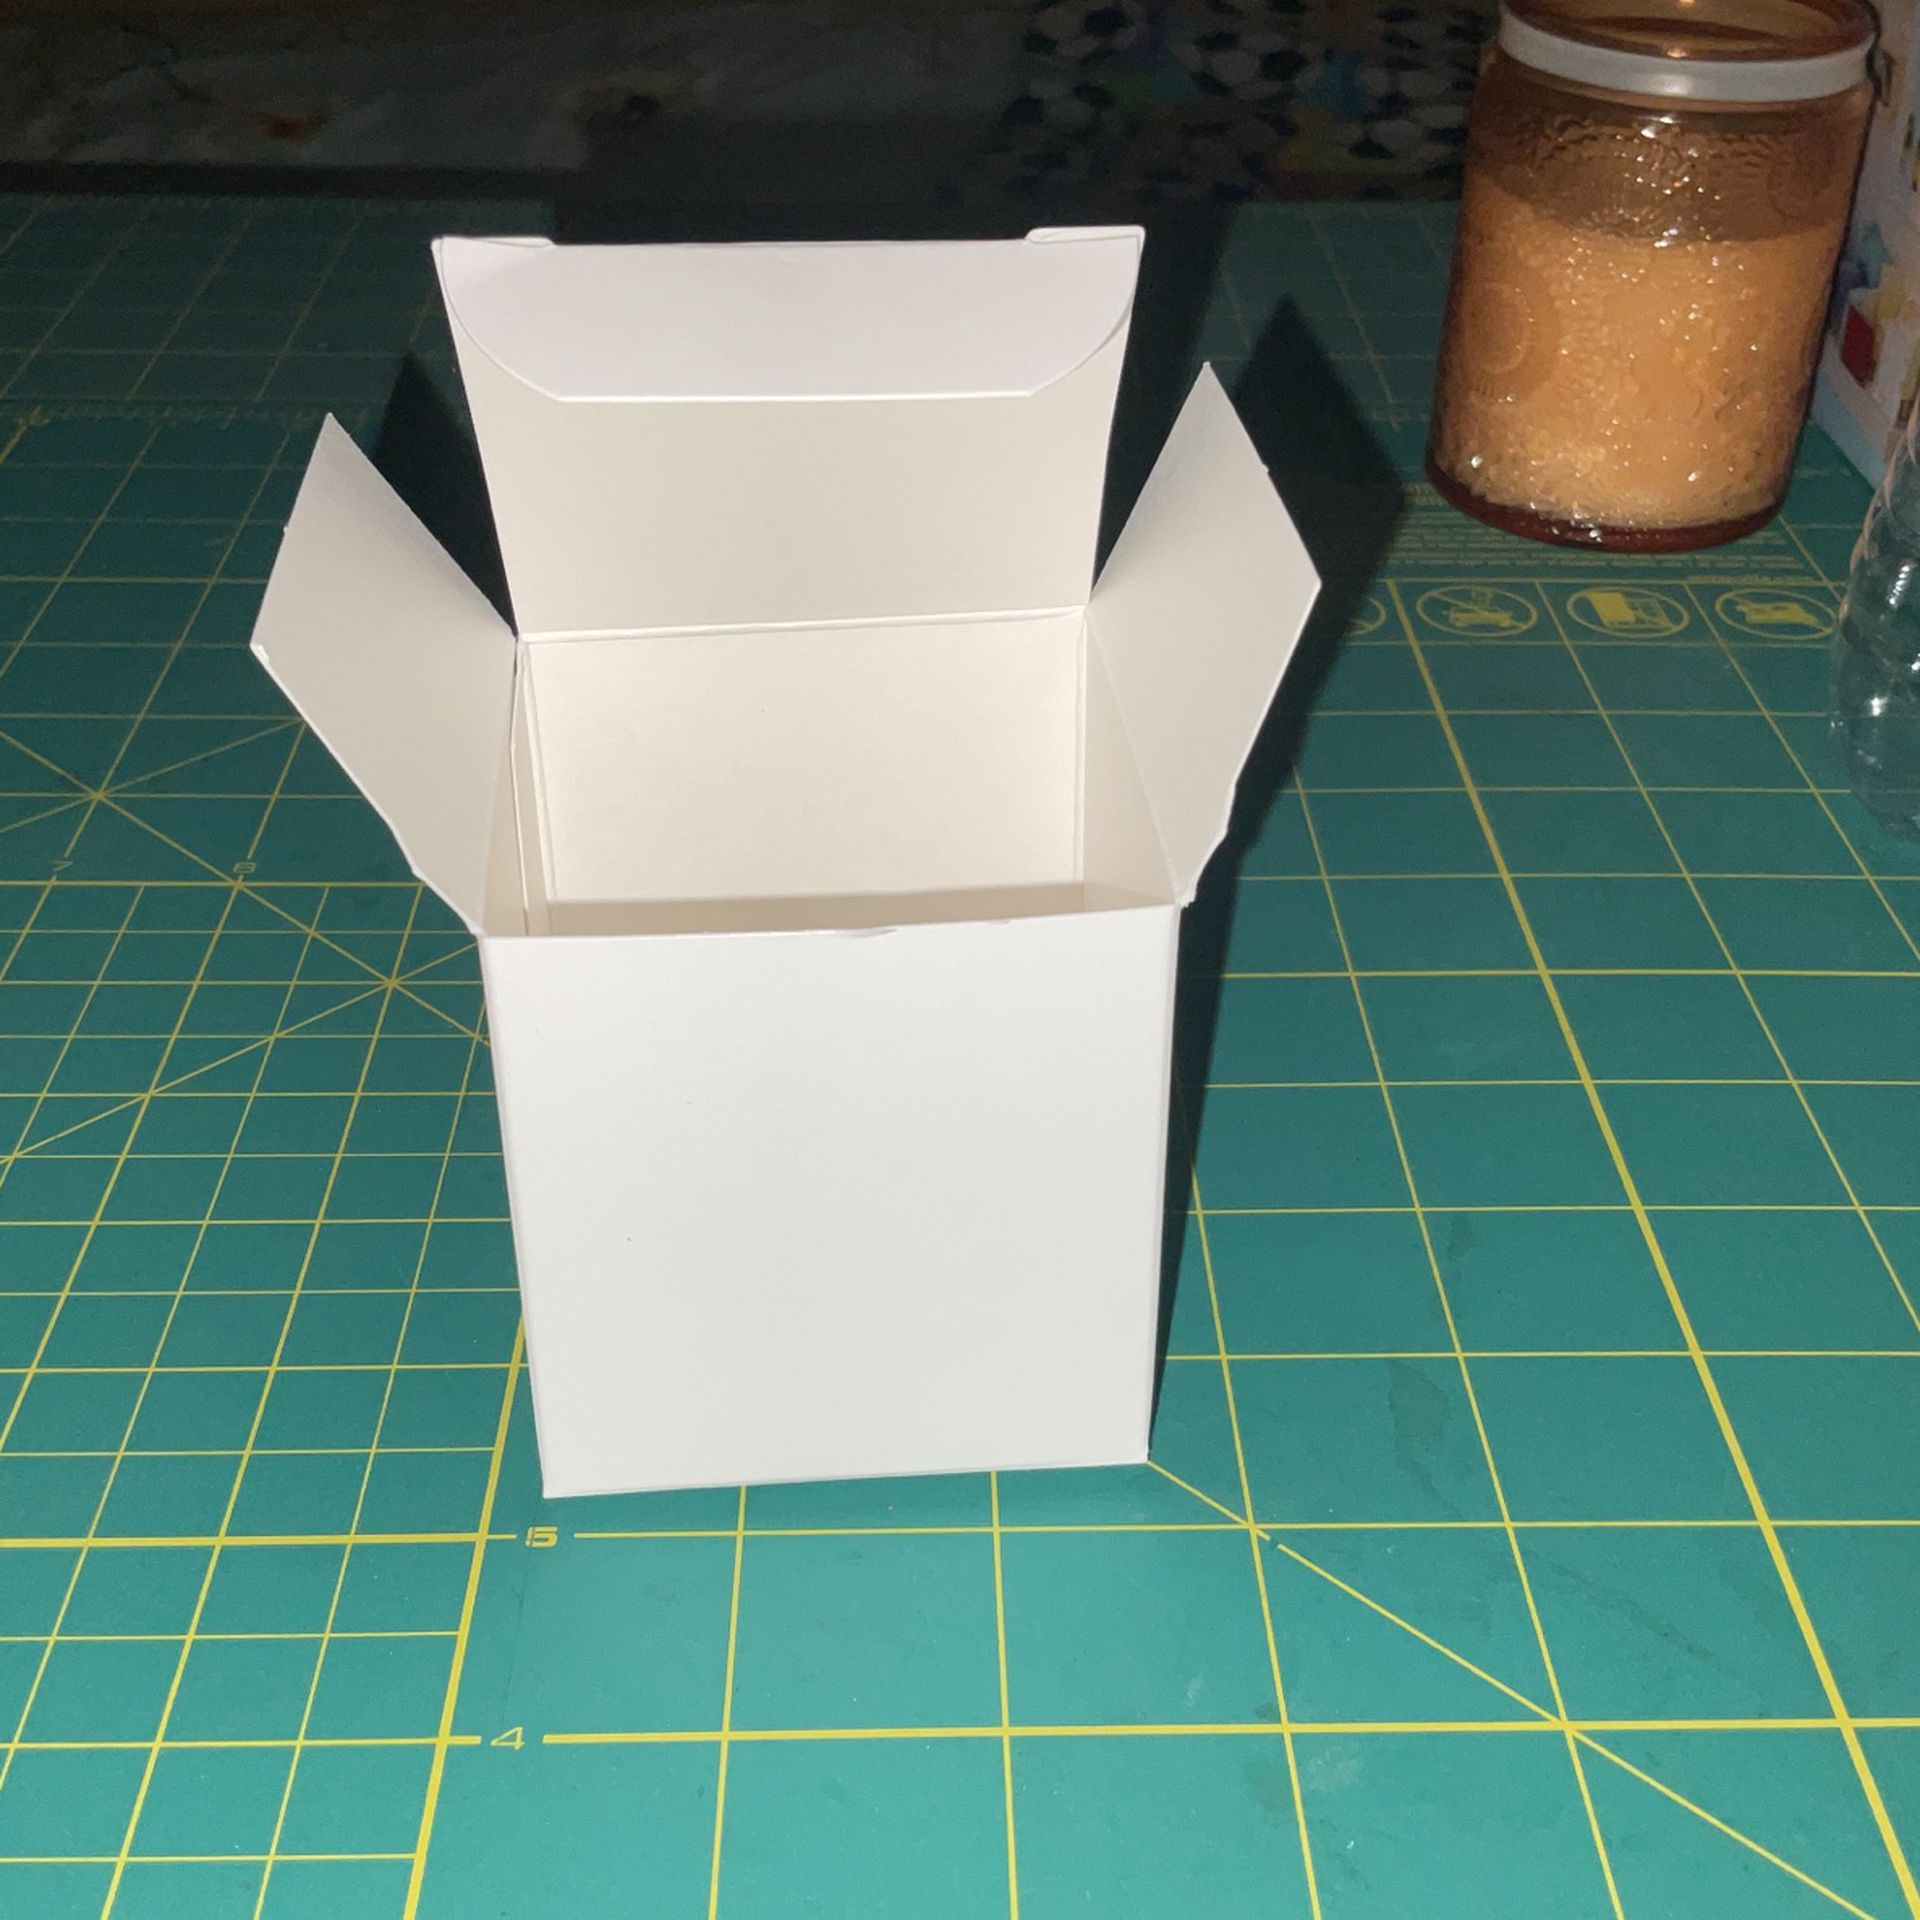 2 1/2 “ x 2 1/2” Boxes. Party Favor Or Hobby Craft Boxes 200Count